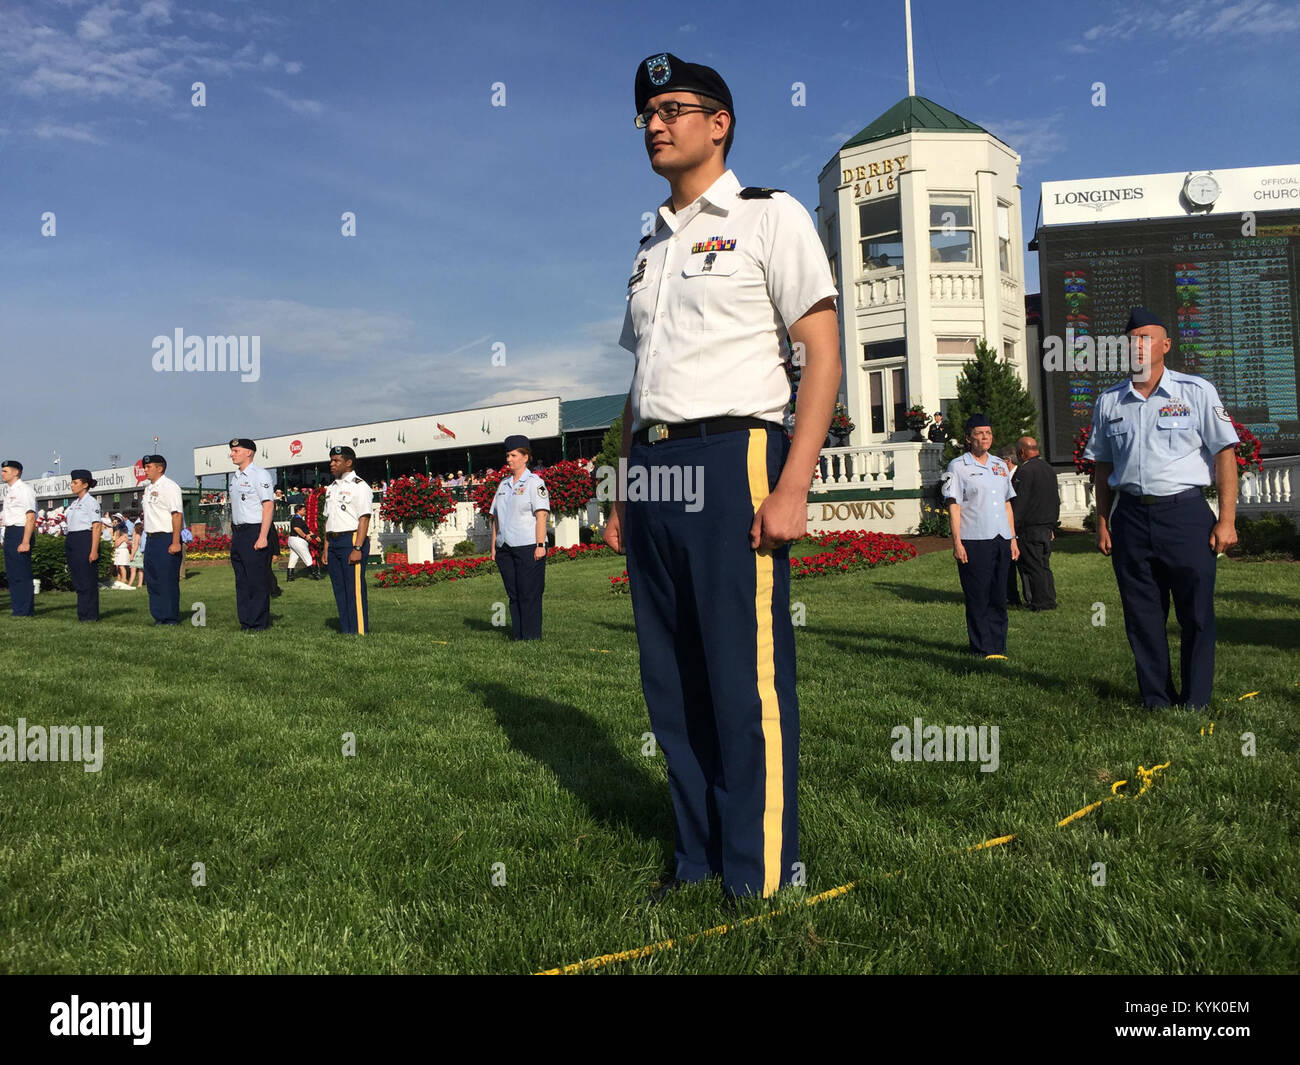 Sgt. Brandon Tagarook takes his position as part of the winner's circle detail at Churchill Downs for the running of the Kentucky Derby in Louisville, Ky., May 7, 2016. (U.S. Army National Guard photo by Staff Sgt. Scott Raymond) Stock Photo